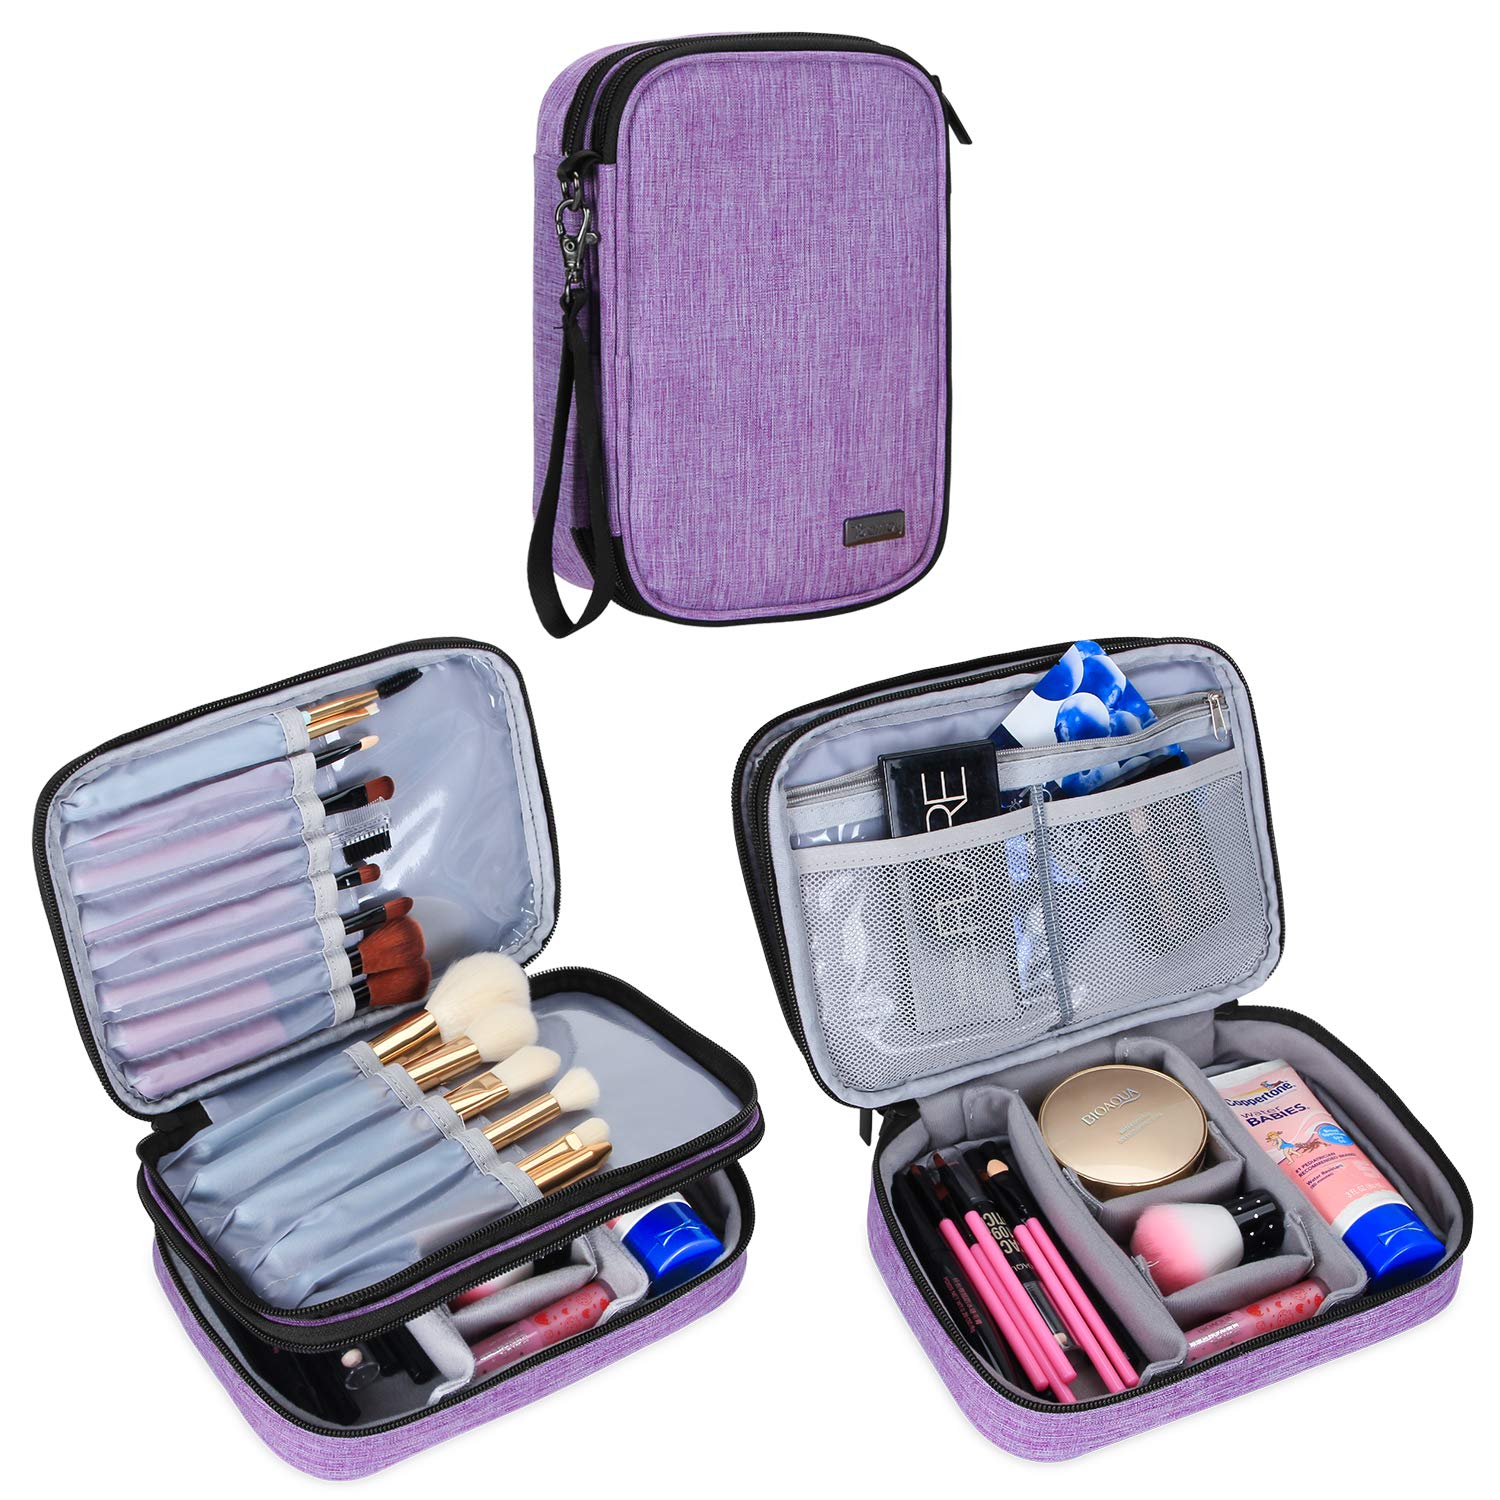 Travel Makeup Brush Case(up to 8.8″), Professional Cosmetic Train Organizer Bag with Handle Strap for Cosmetic Essentials-Medium and Makeup Brushes, Purple(No Accessories Included)